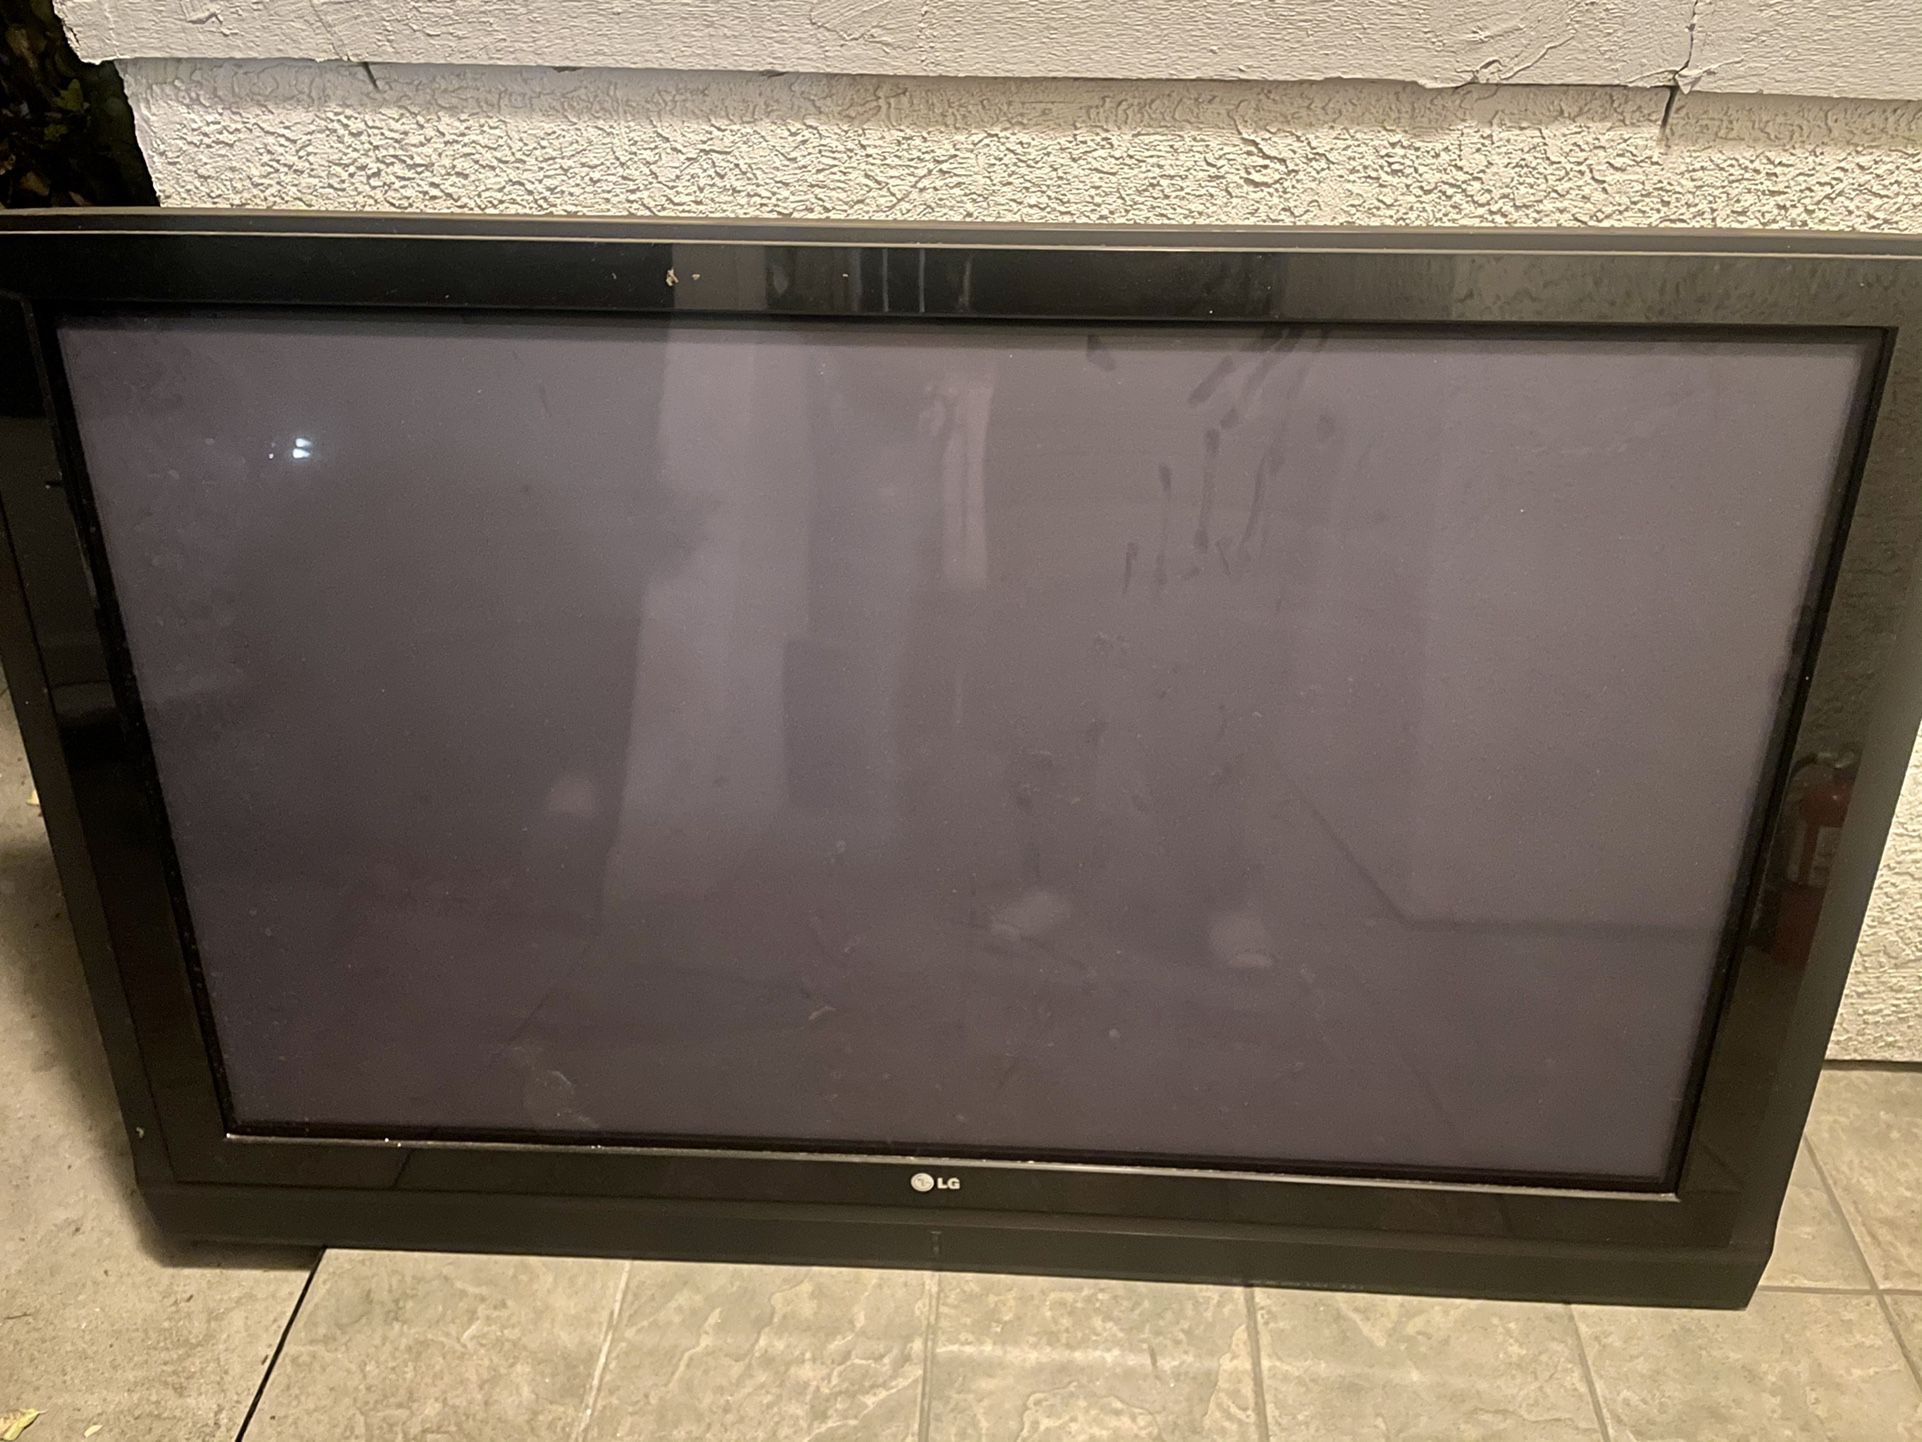 FREE FOR RECYCLE: 60” LG Plasma TV. Broken. Missing Remote Control.